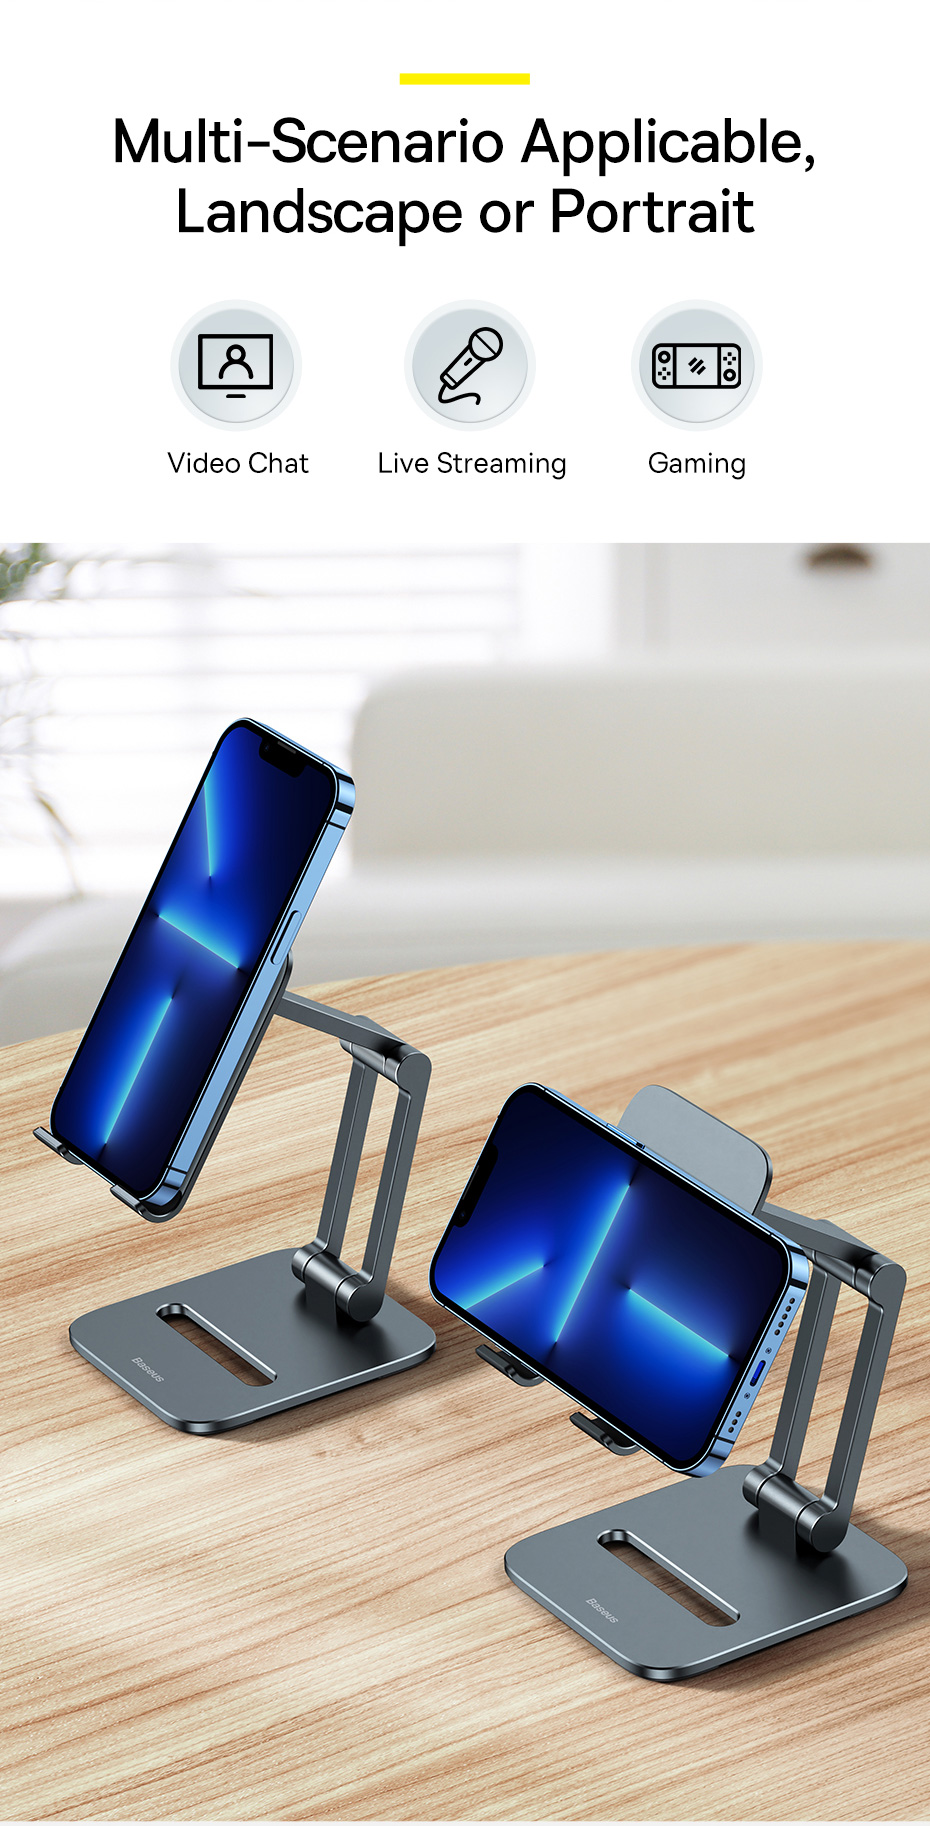 Baseus-Phone-Holder-Desk-Double-Axis-Foldable-Metal-Stand-for-iPad-Pro-Air-Tablet-1975775-16